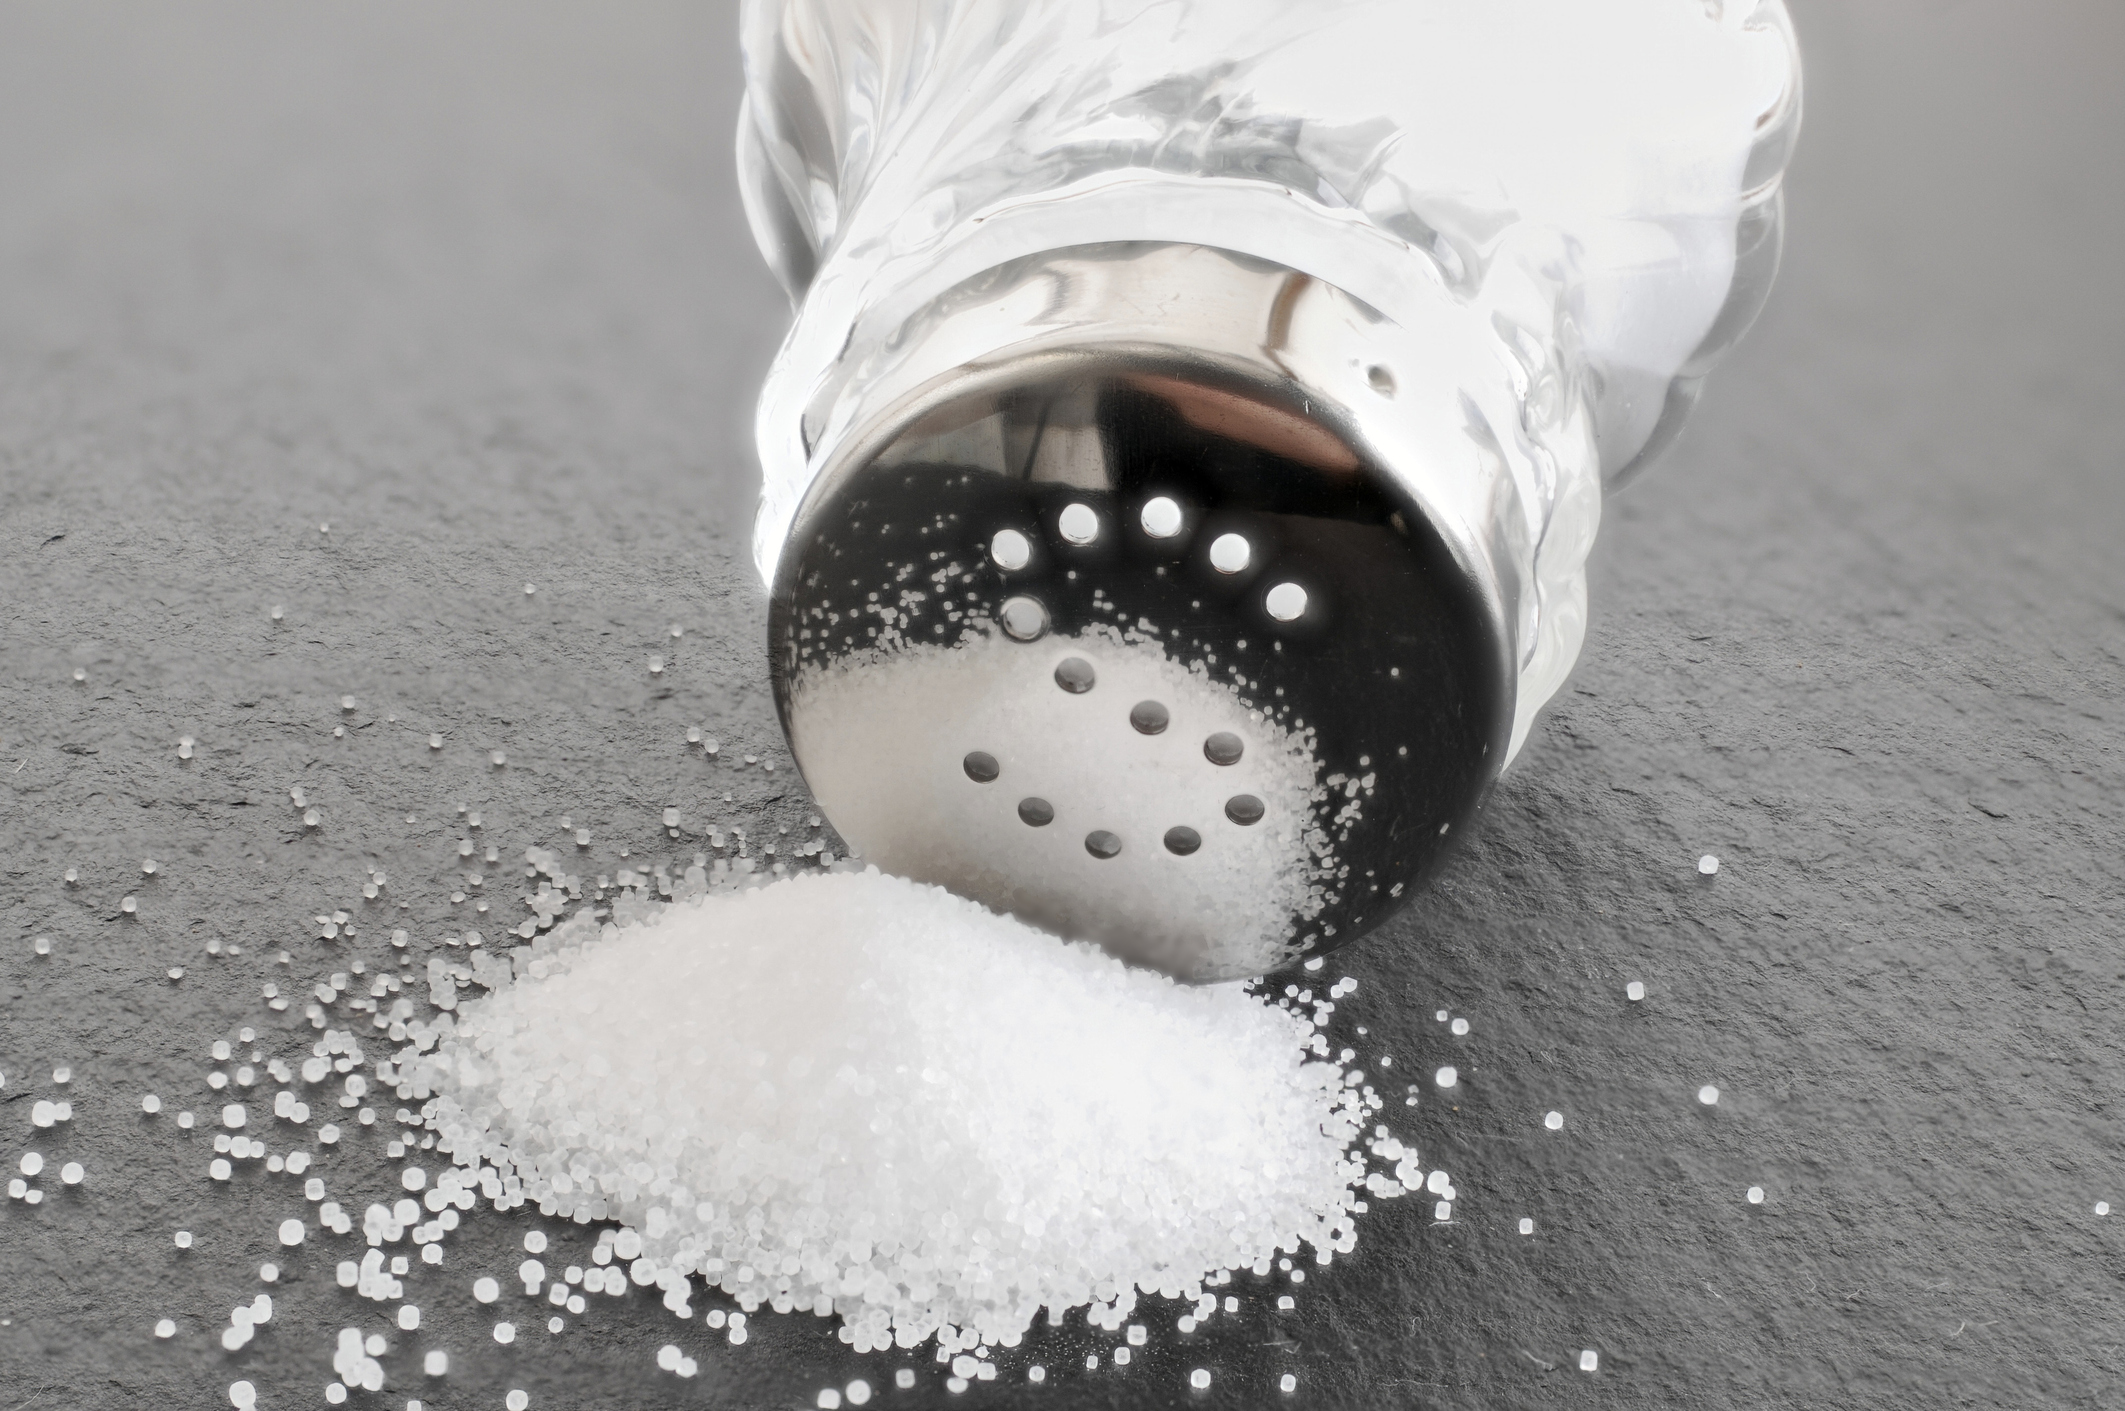 high salt diet increases bone fragility and fracture risk